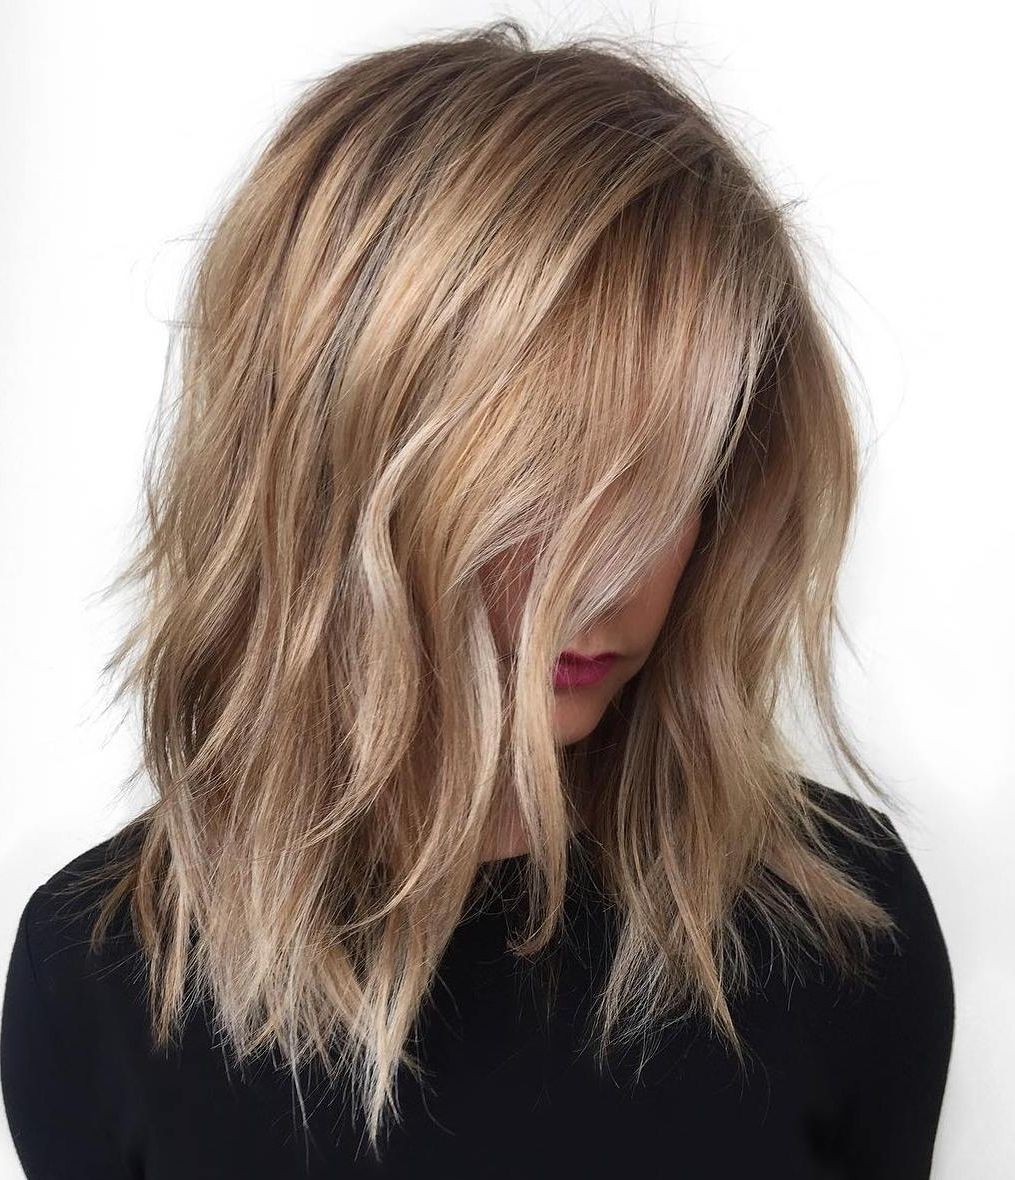 40 Styles With Medium Blonde Hair For Major Inspiration Pertaining To Most Current Tousled Shoulder Length Ombre Blonde Hairstyles (View 5 of 20)